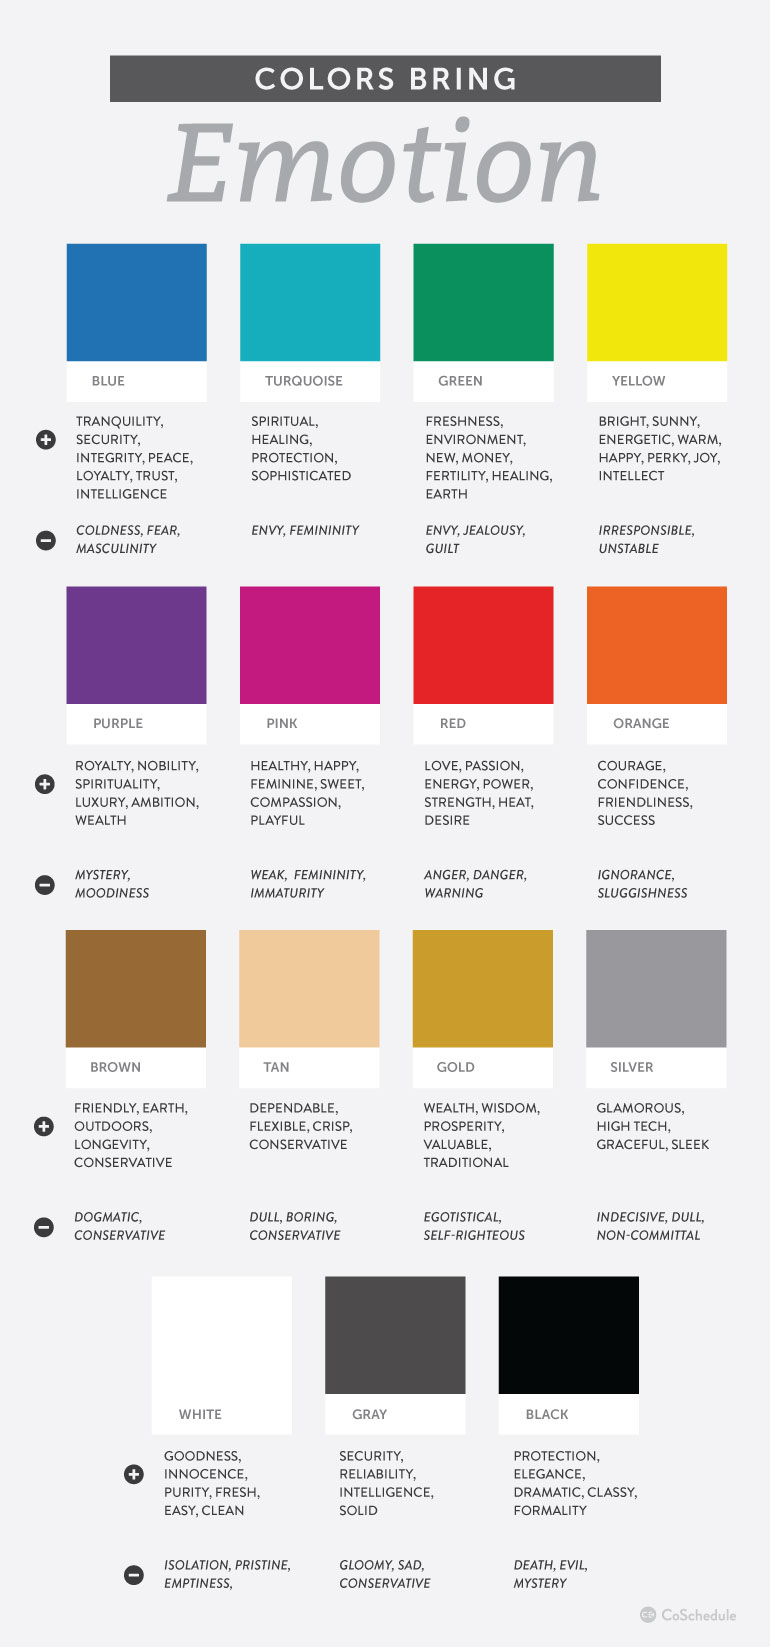 Colors of Emotion infographic